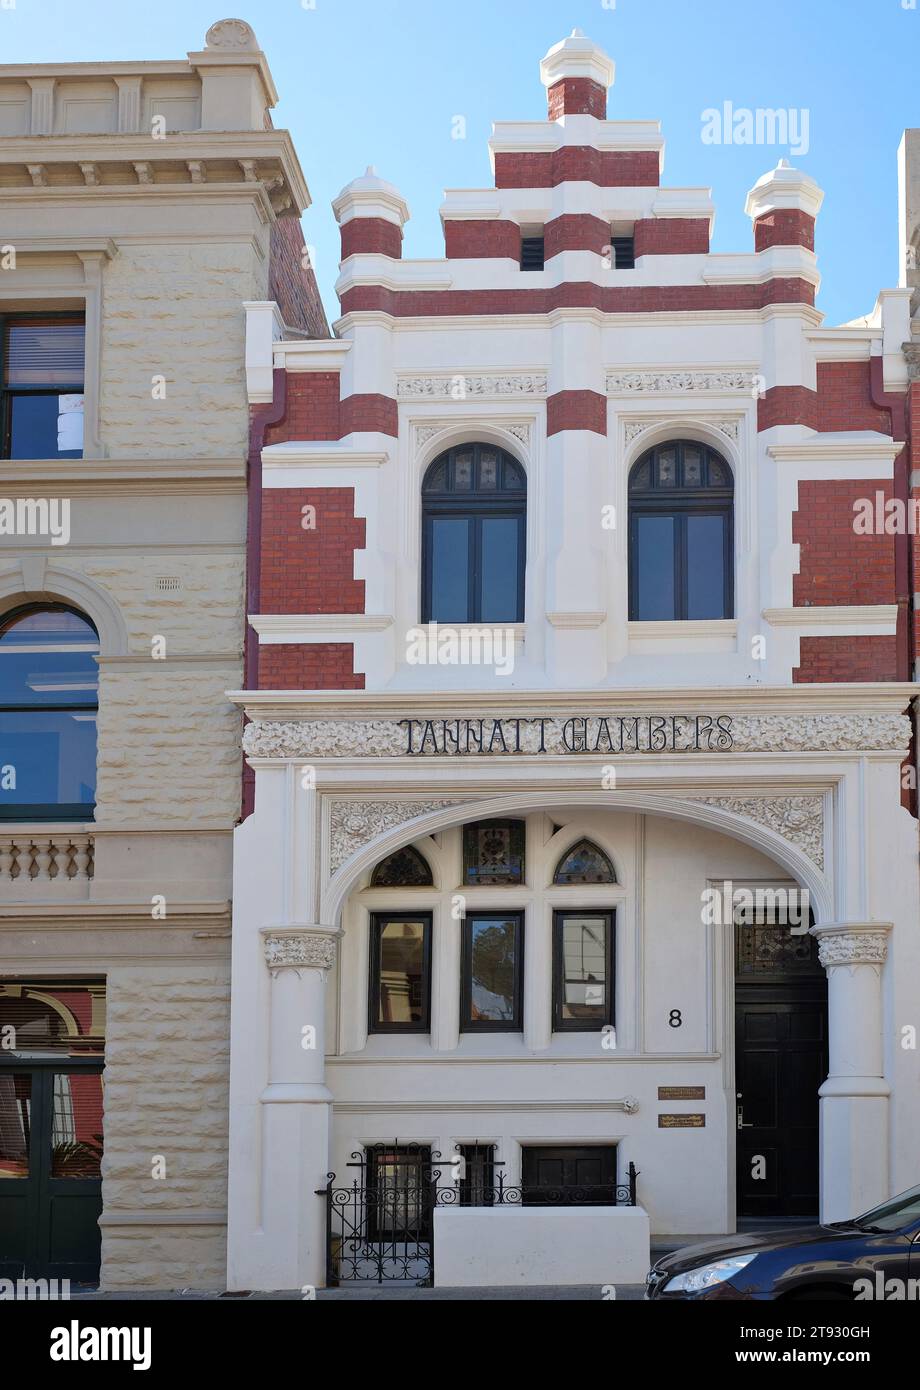 Tannatt Chambers, Architectural details of Fremantle's West End buildings High Street late Victorian and Edwardian architecture Stock Photo